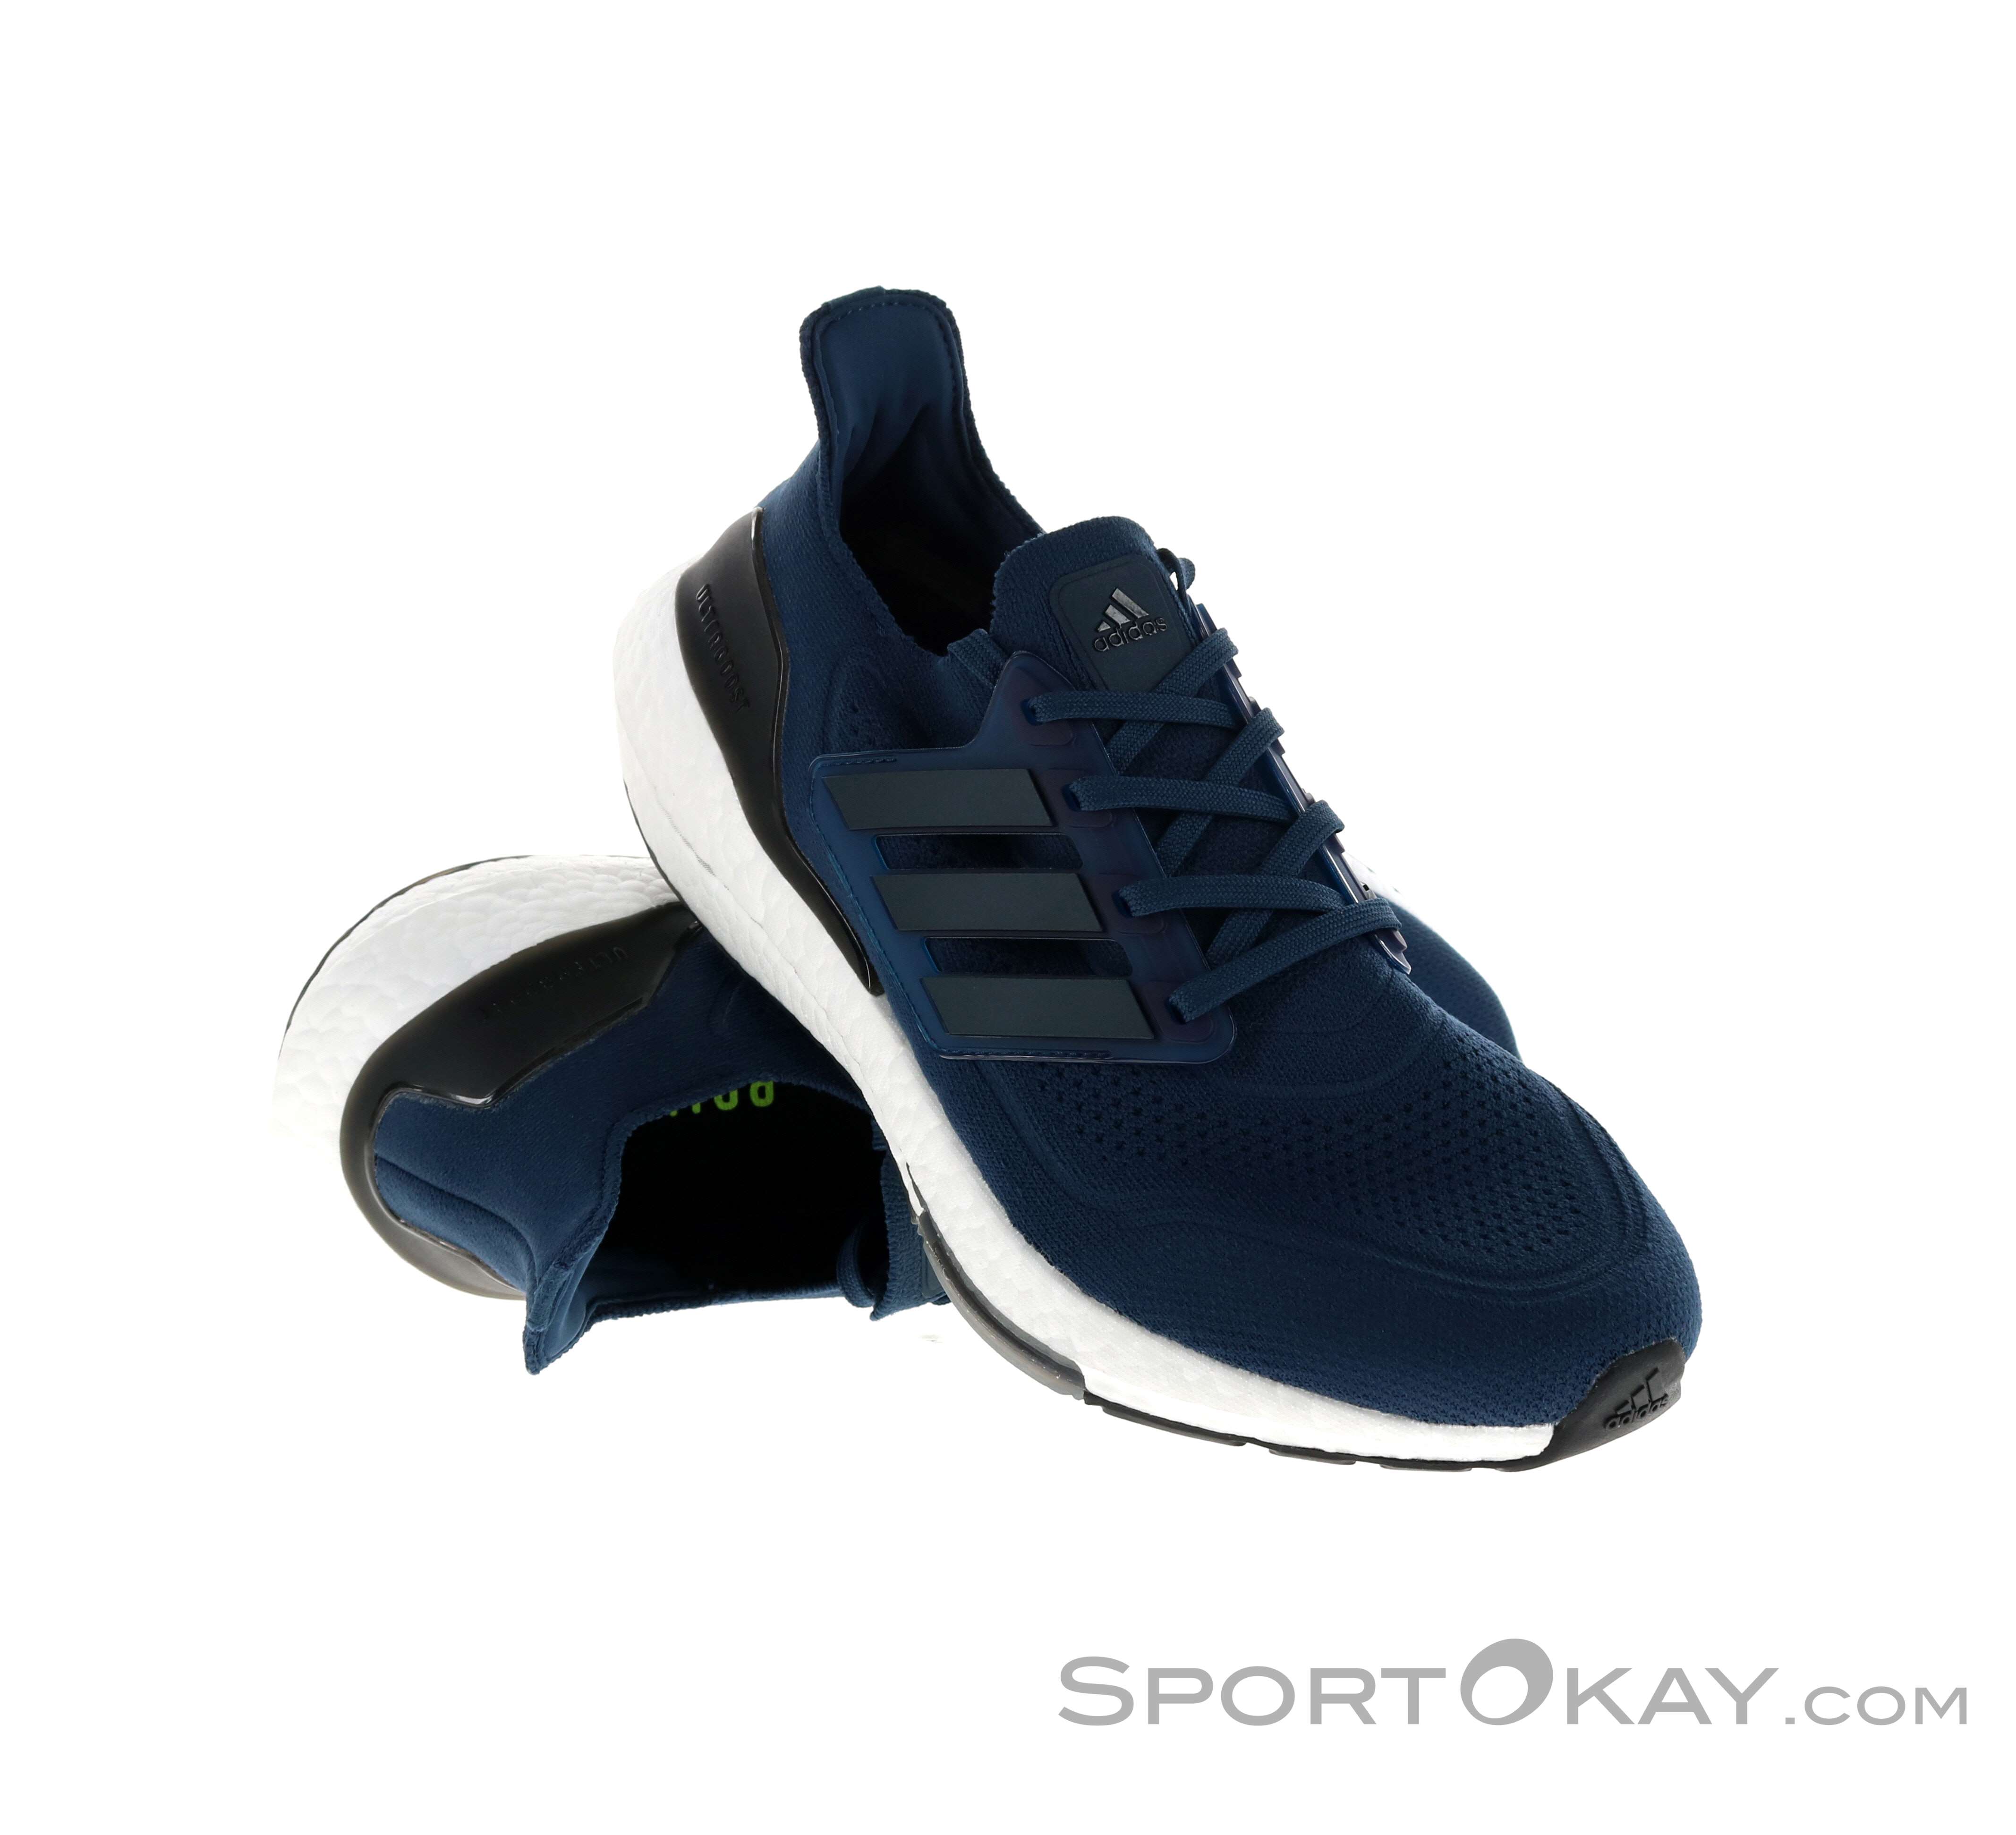 adidas ultra boost mens running shoes blue white